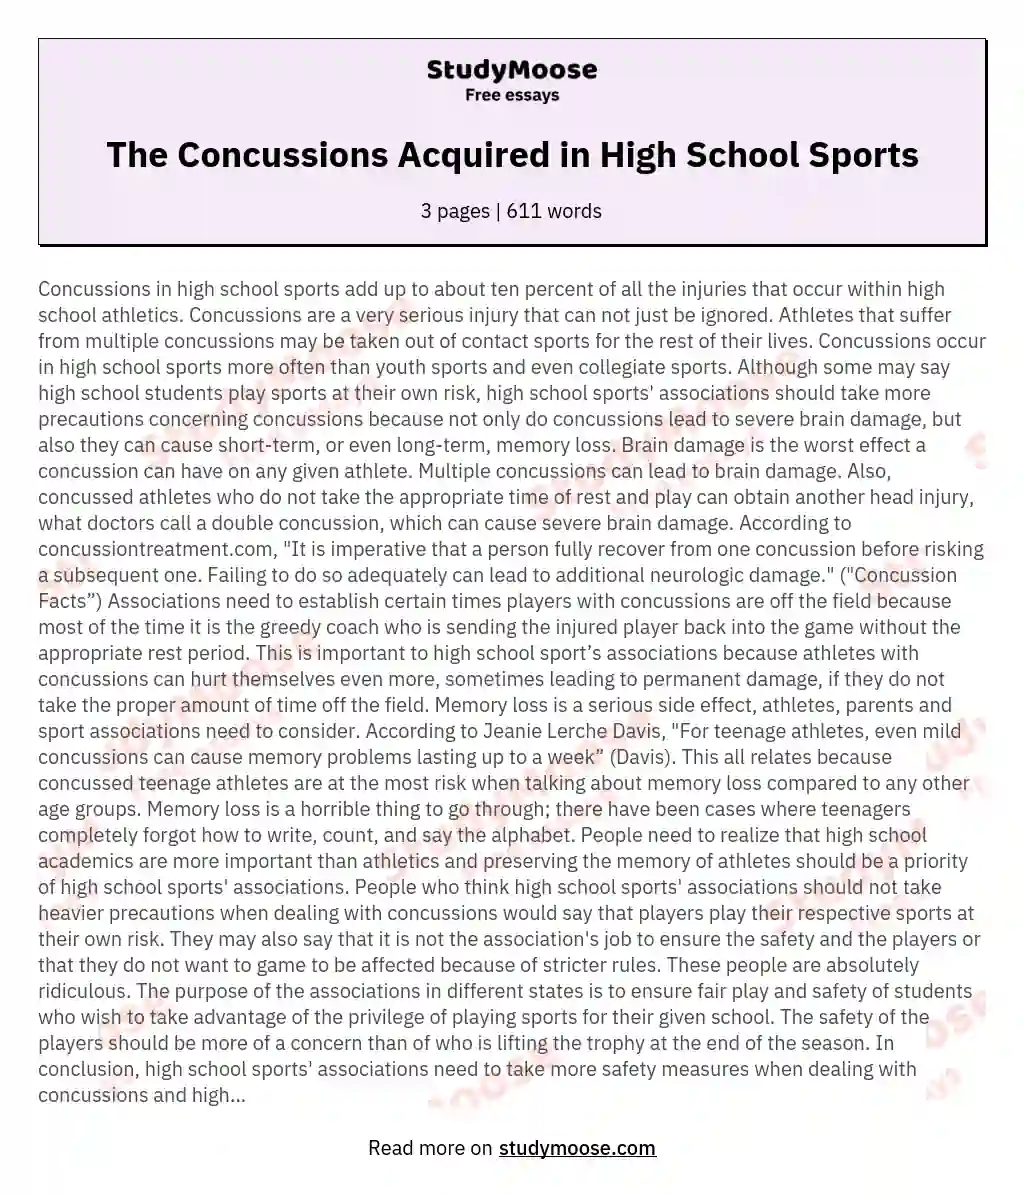 The Concussions Acquired in High School Sports essay